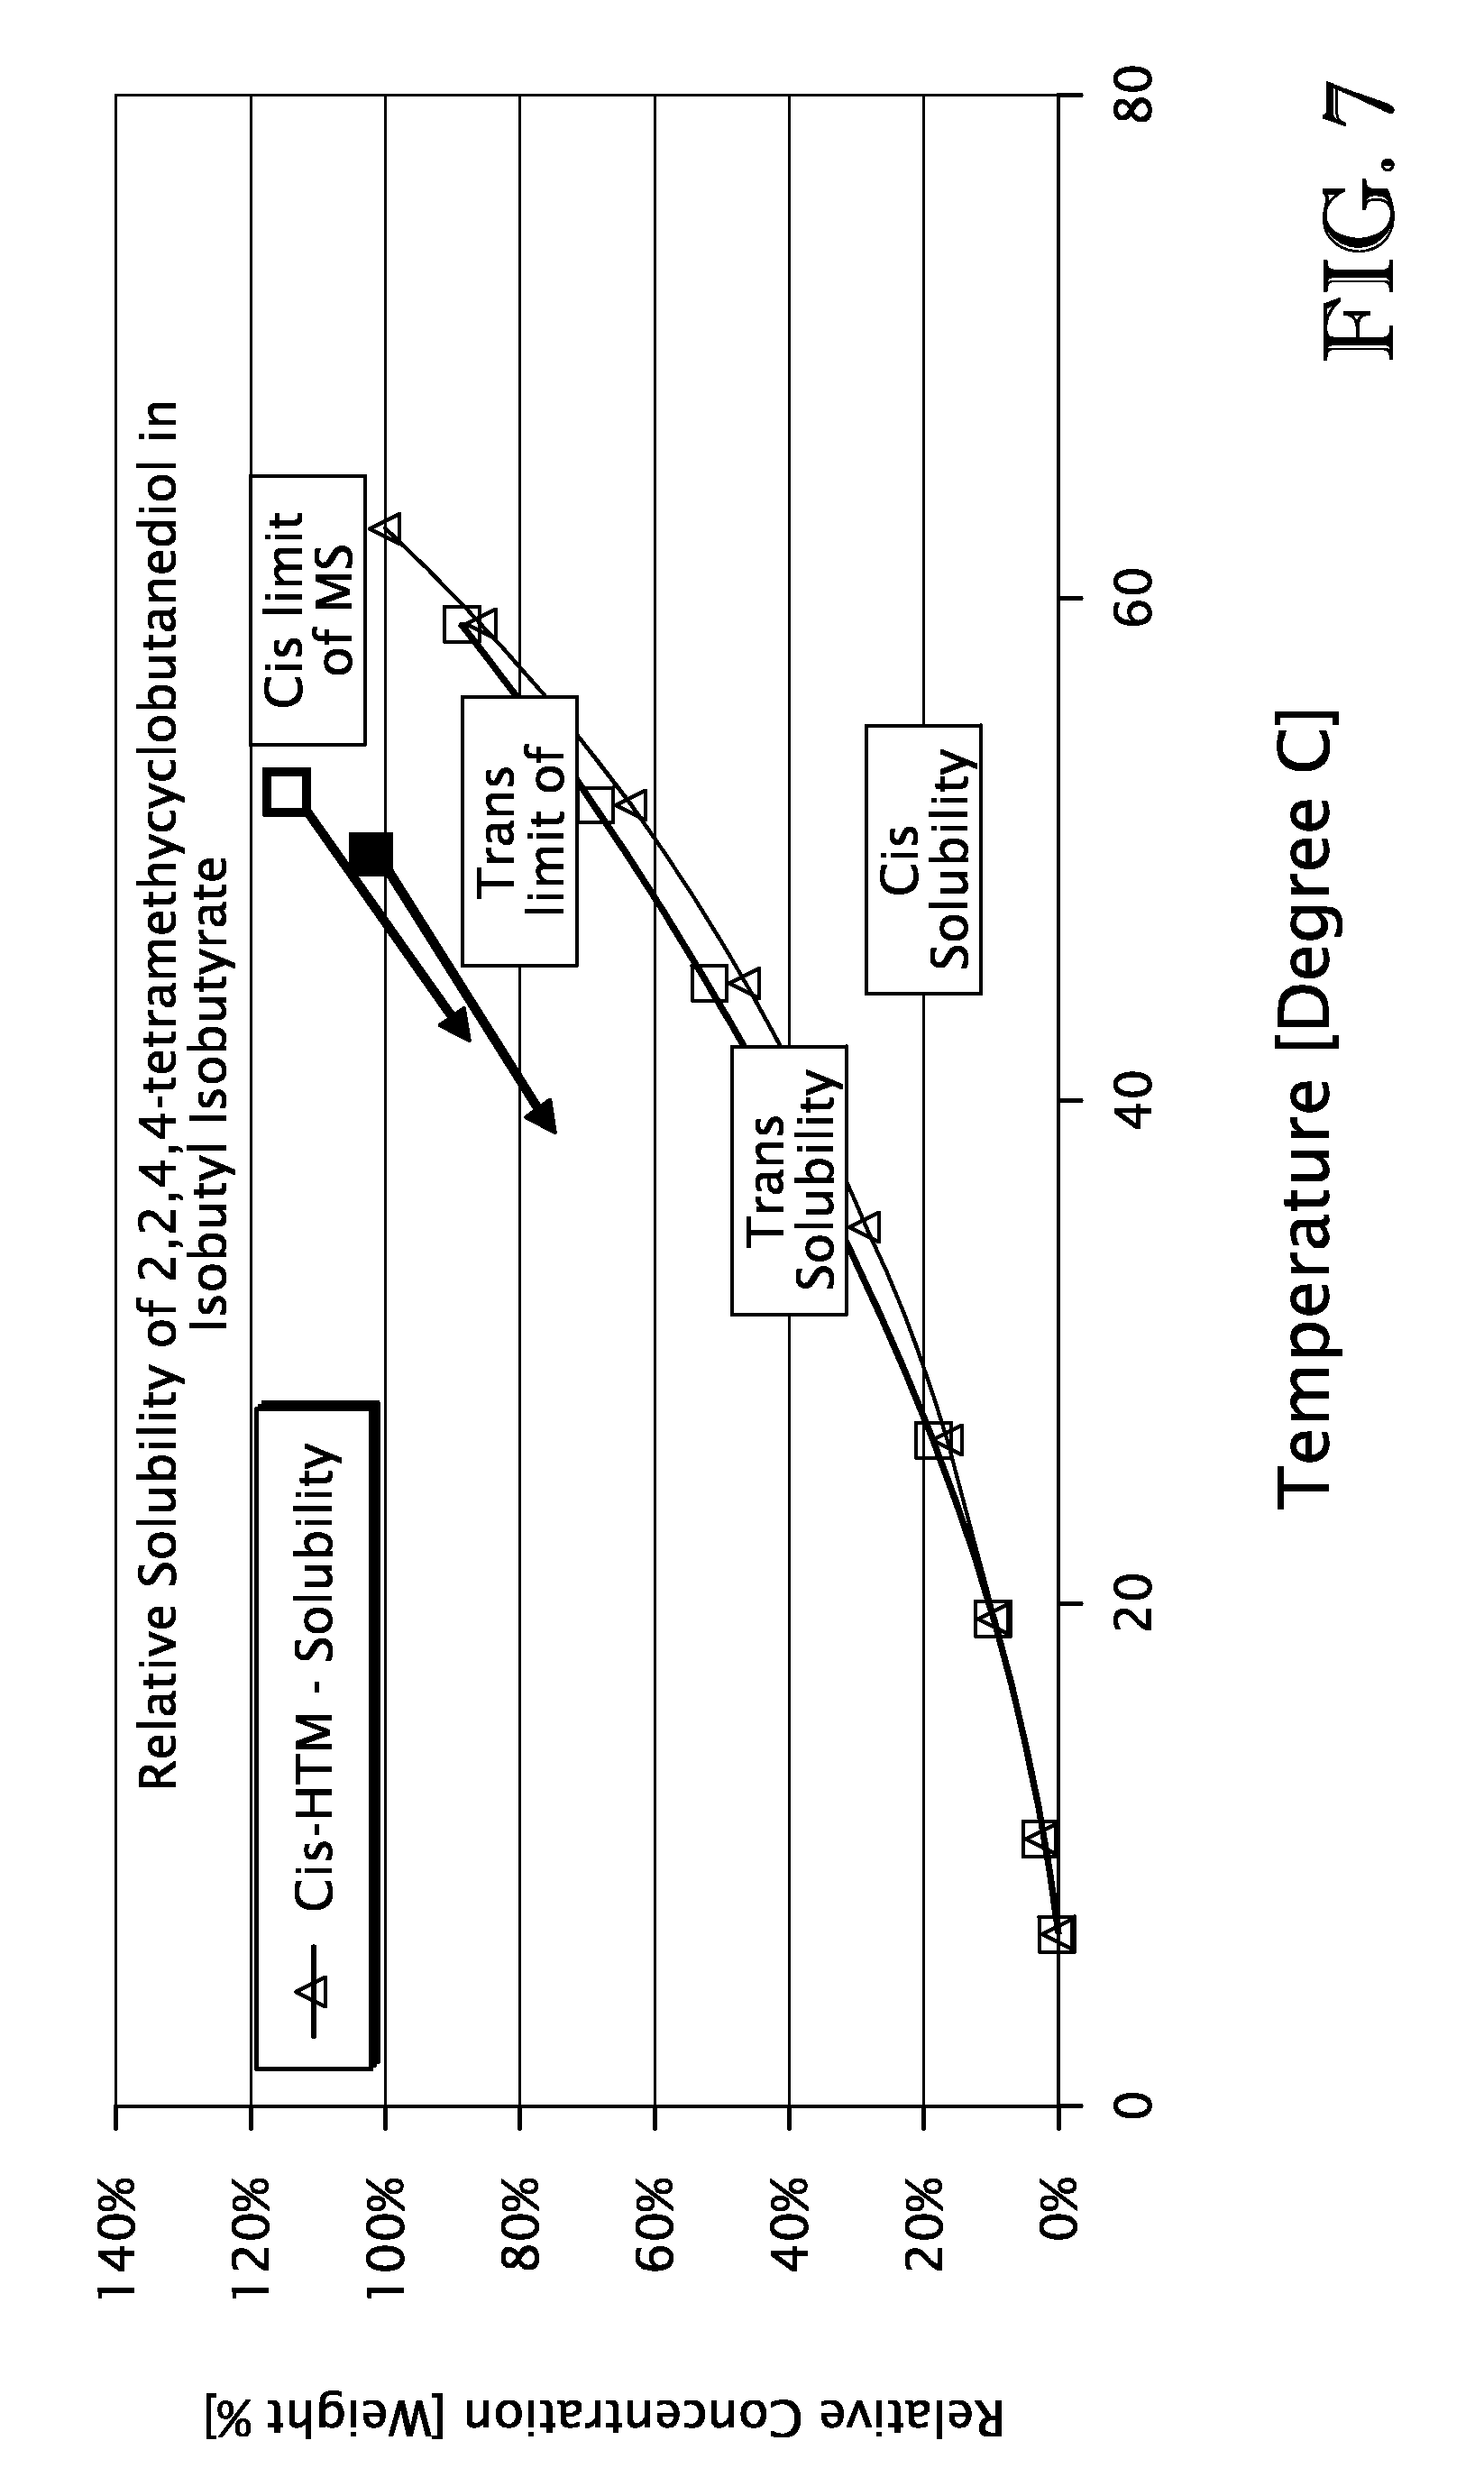 Processes for the crystallization of 2,2,4,4-tetramethylcyclobutanediol